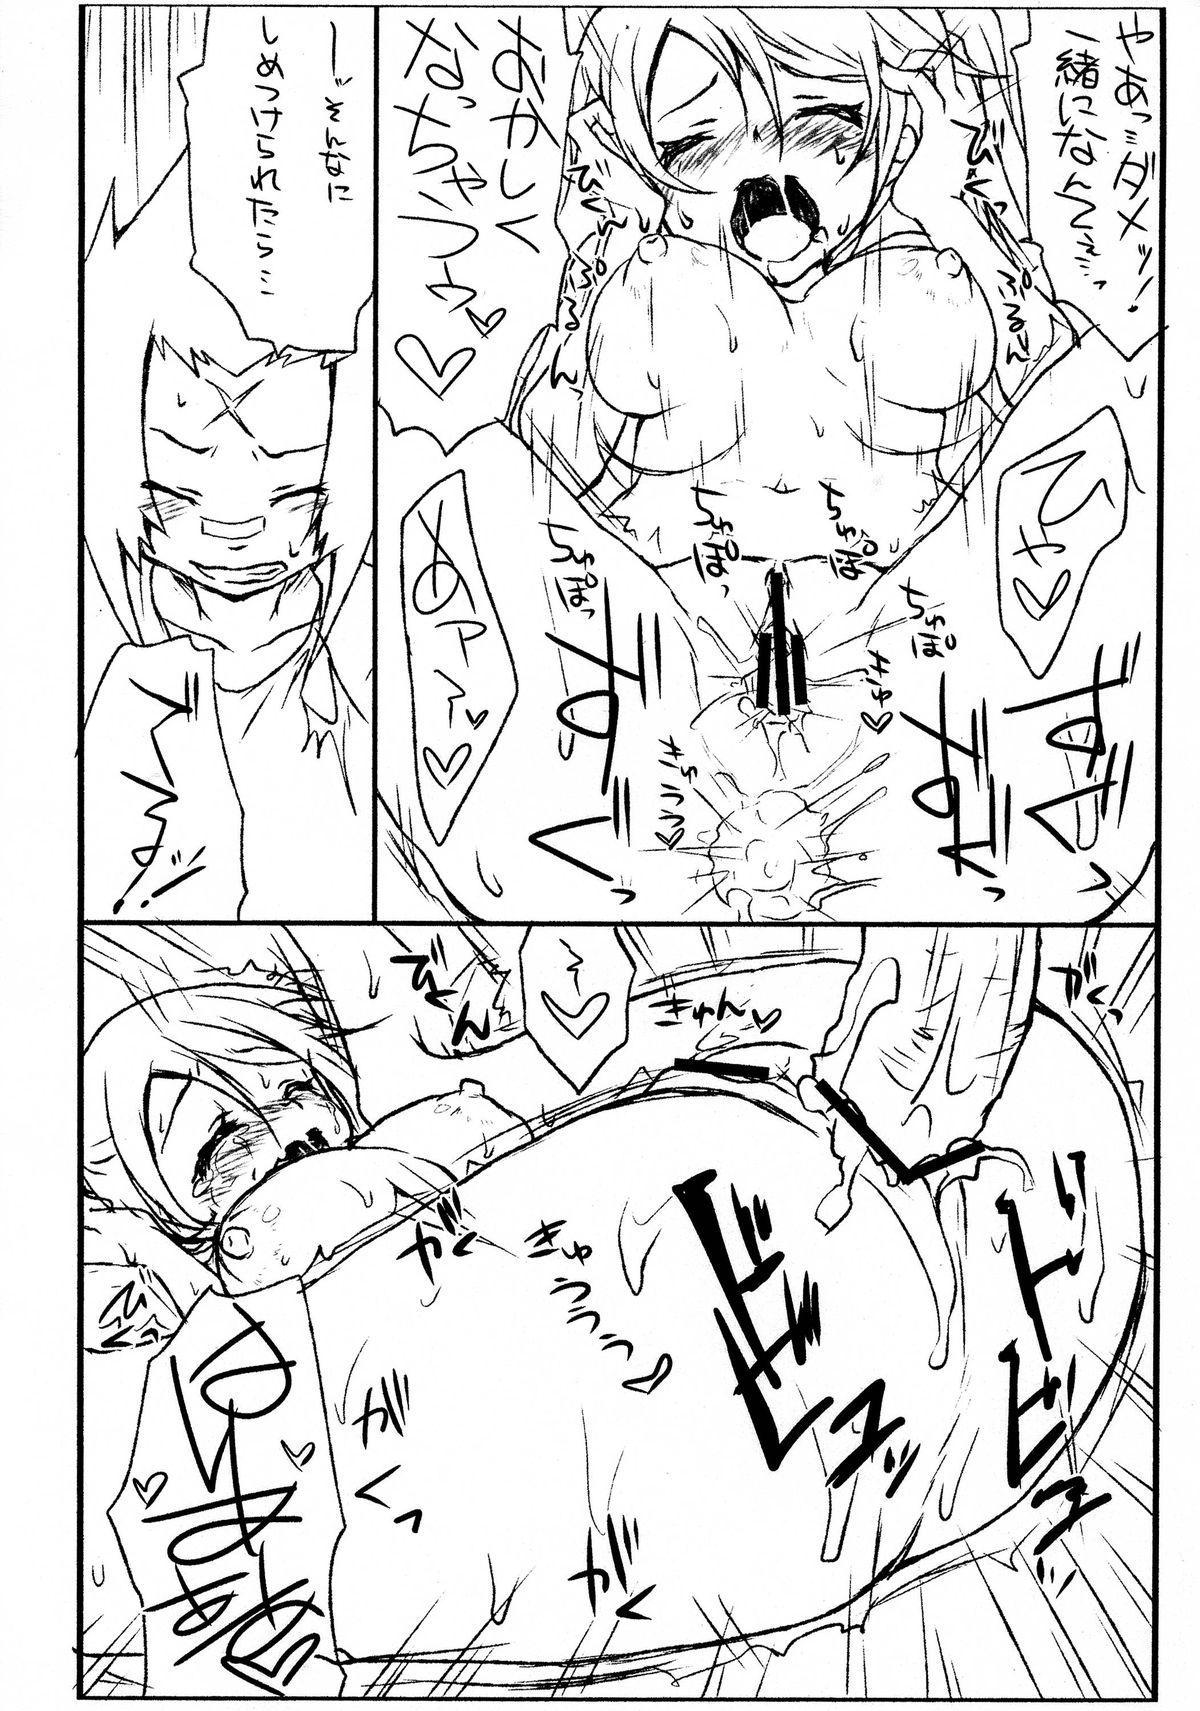 Soapy Seishun Curiosity - Etrian odyssey Party - Page 12